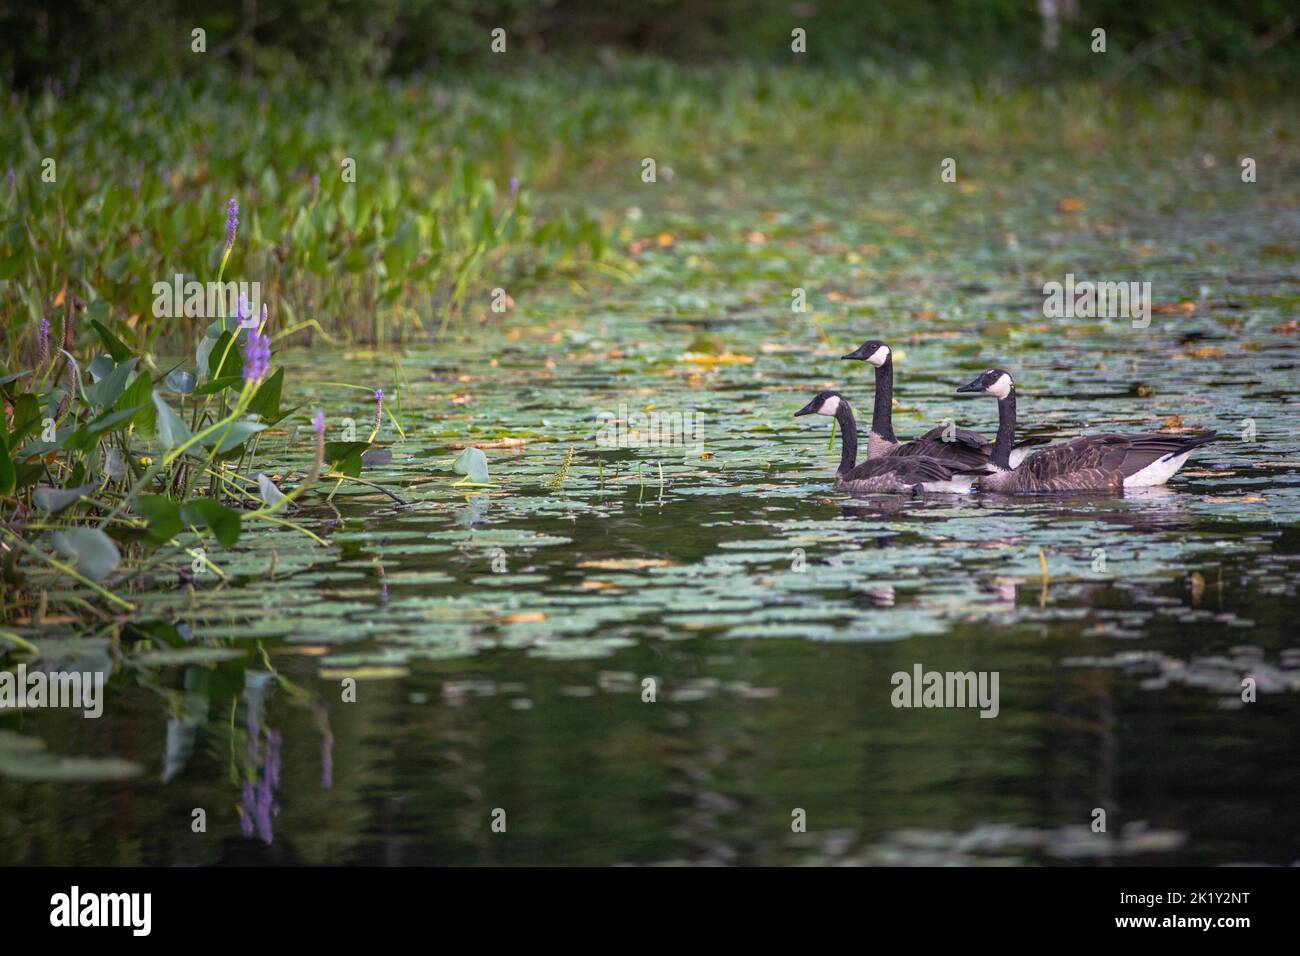 A flock of Canada geese, Branta canadensis captured swimming on a lake surrounded by vegetation Stock Photo